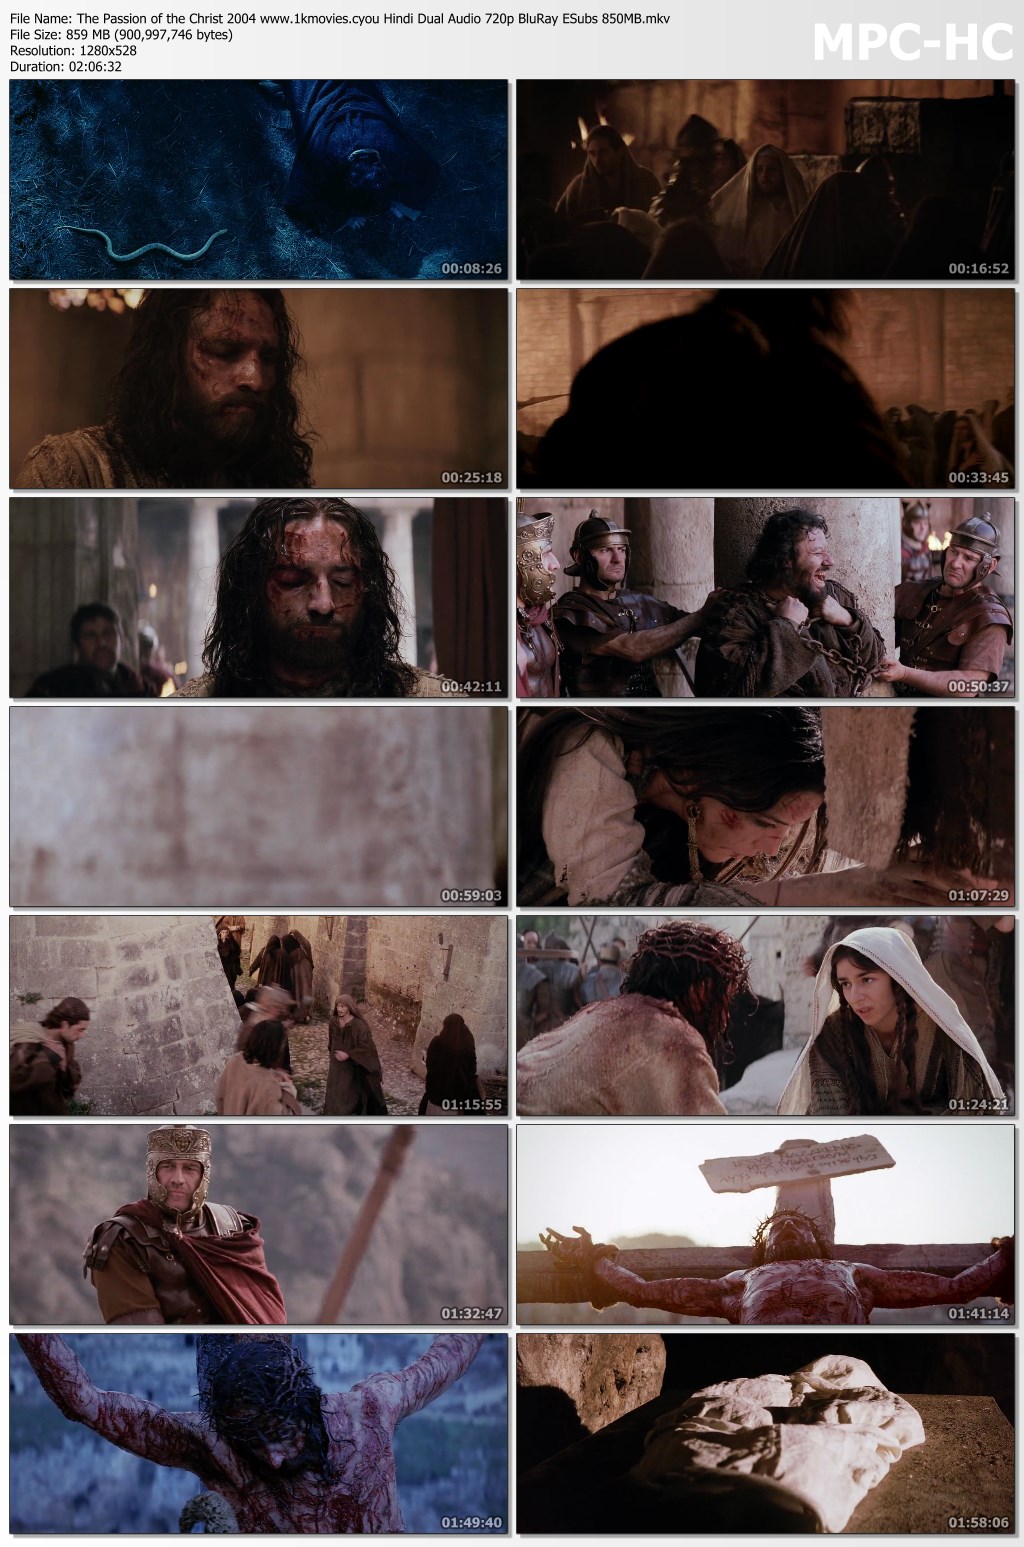 watch passion of the christ bluray rip 720p